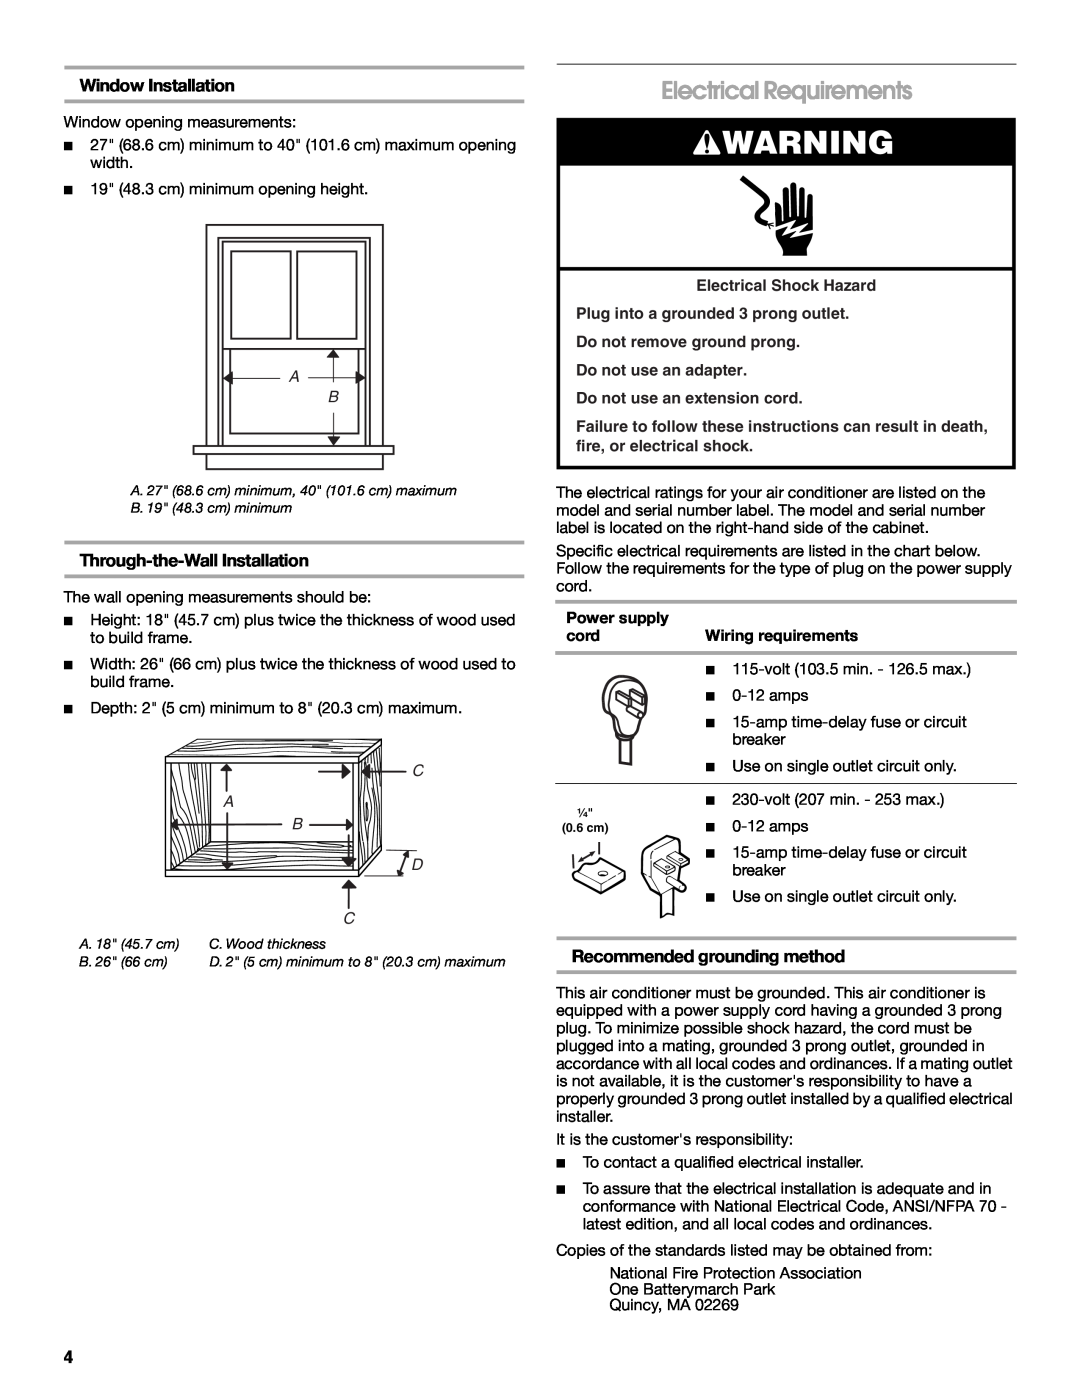 Whirlpool CA15WYR0 manual Electrical Requirements, Window Installation, Recommended grounding method, C A B D 